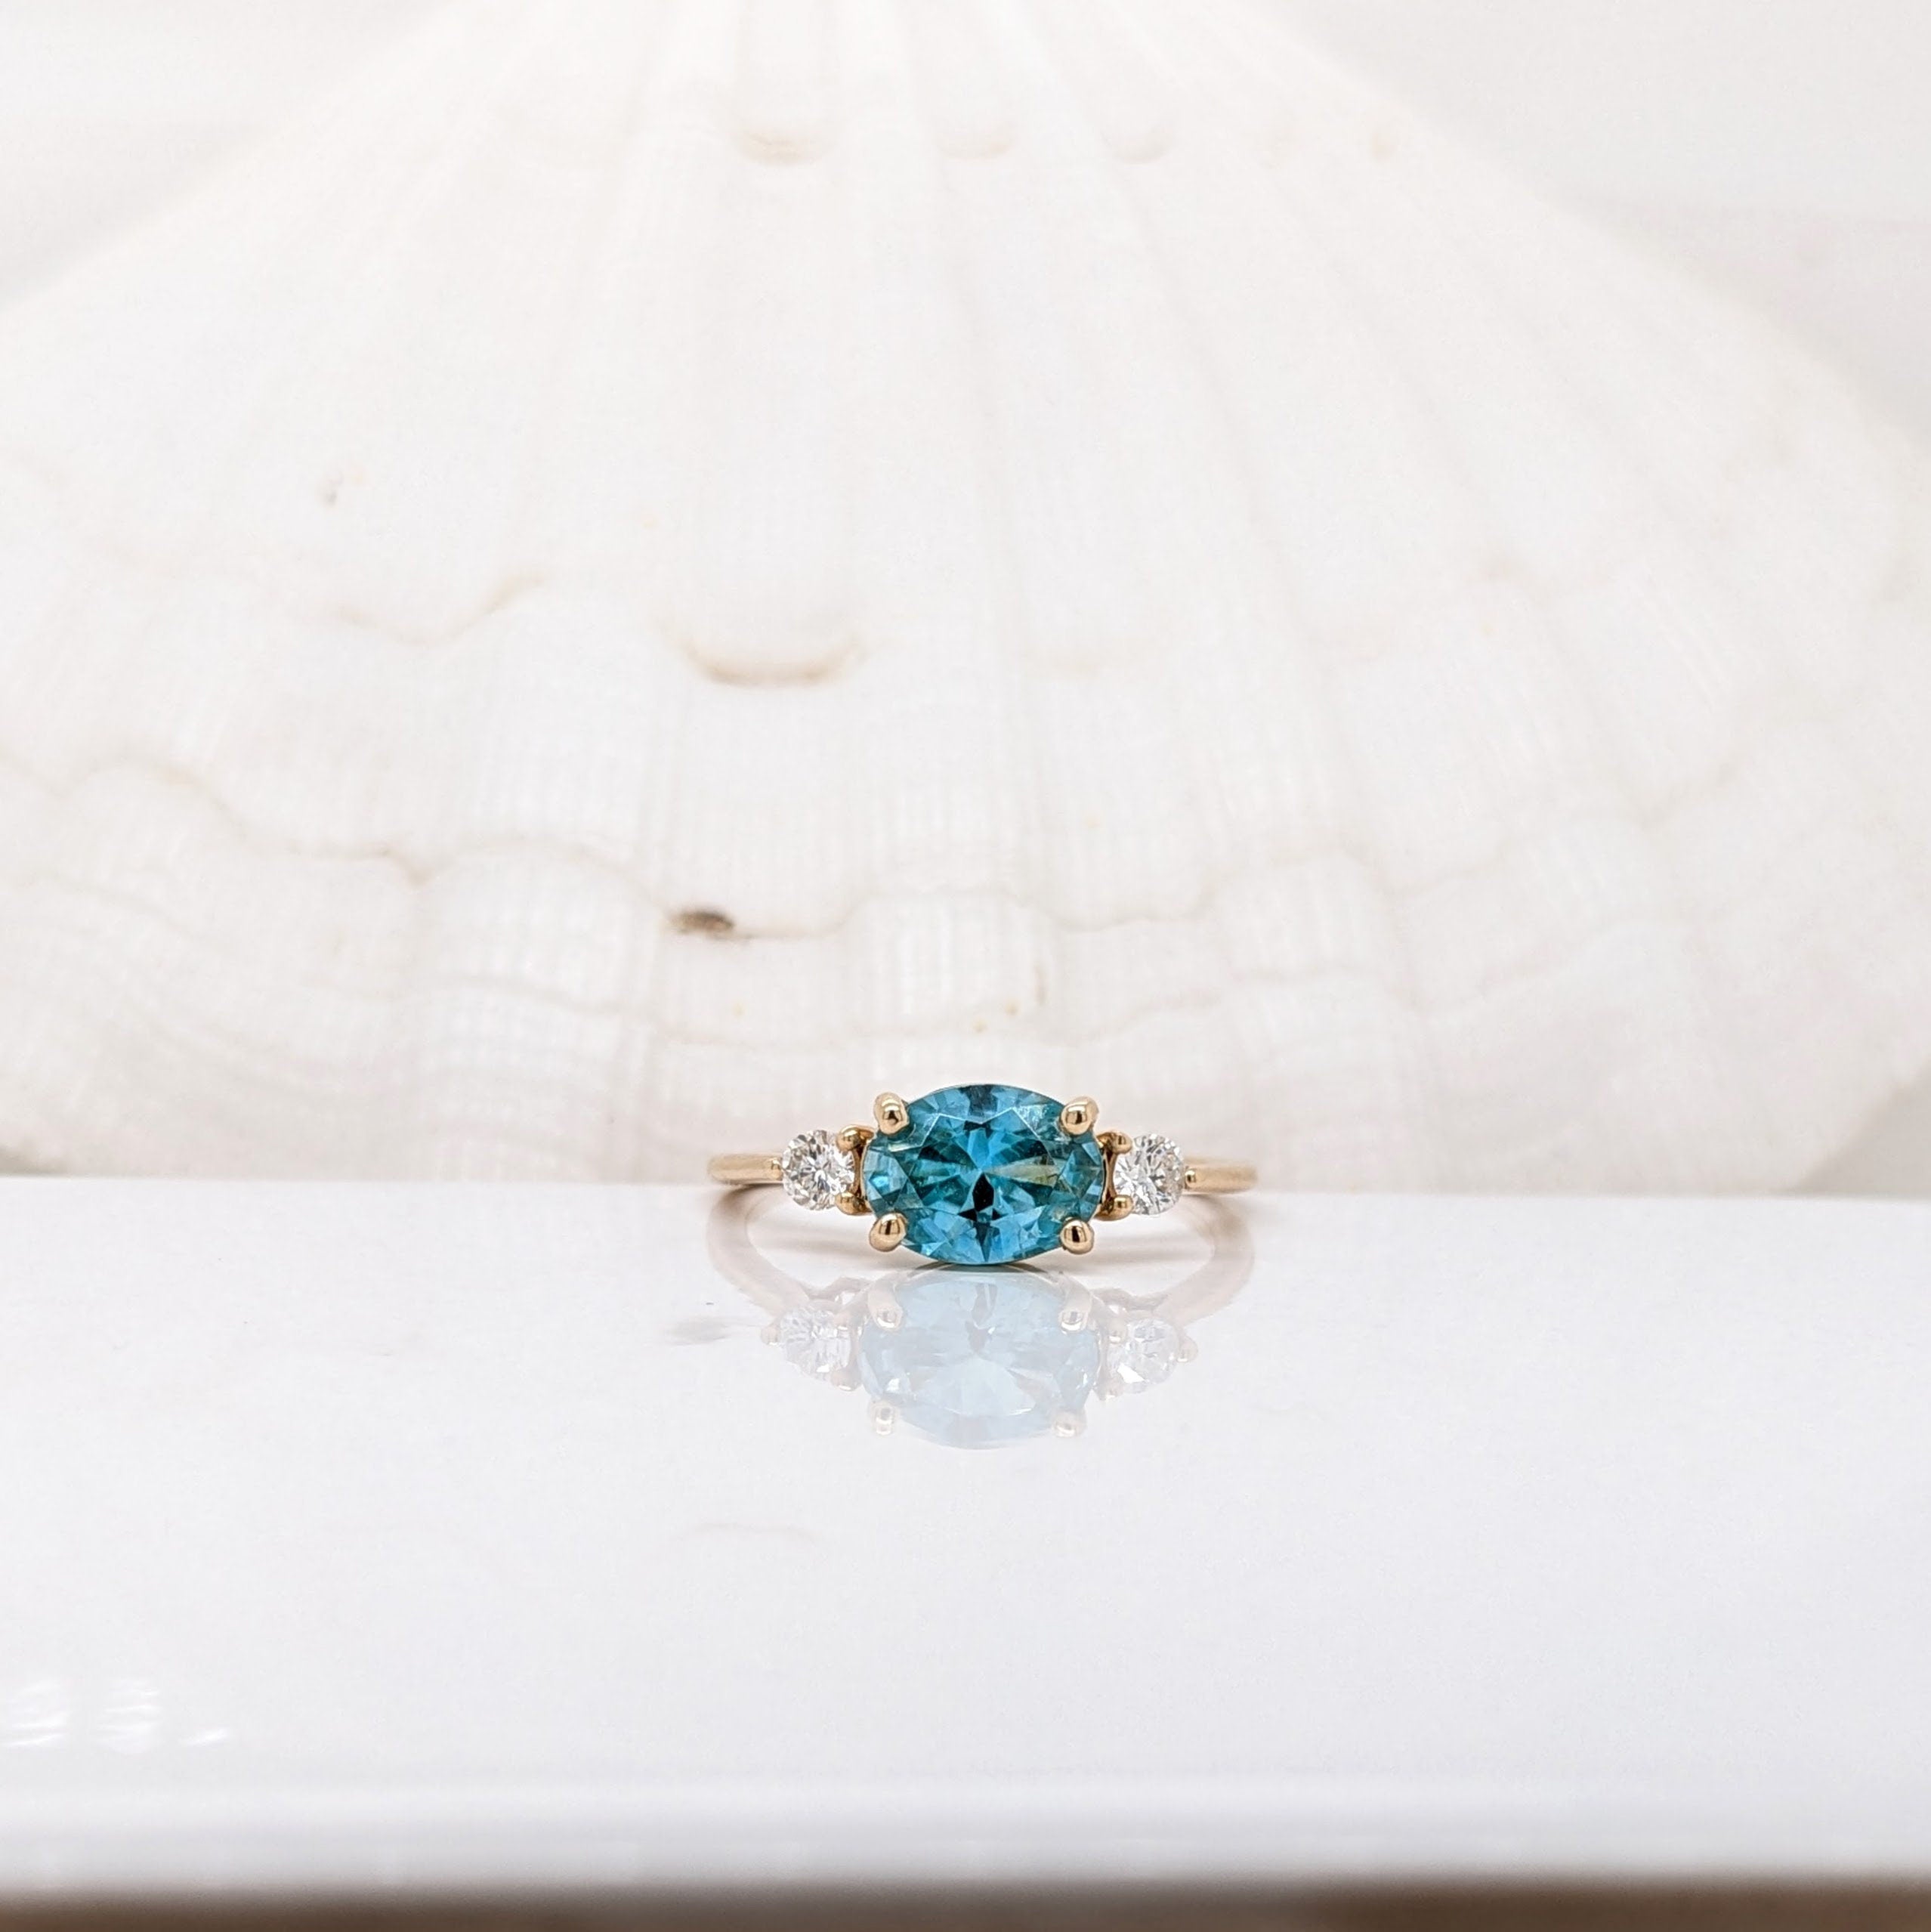 Dainty Oval Cut Blue Zircon Ring in Solid 14K Yellow Gold with Natural Diamond Accents | 8x6mm | December Birthstone | Prongs | Daily Wear |